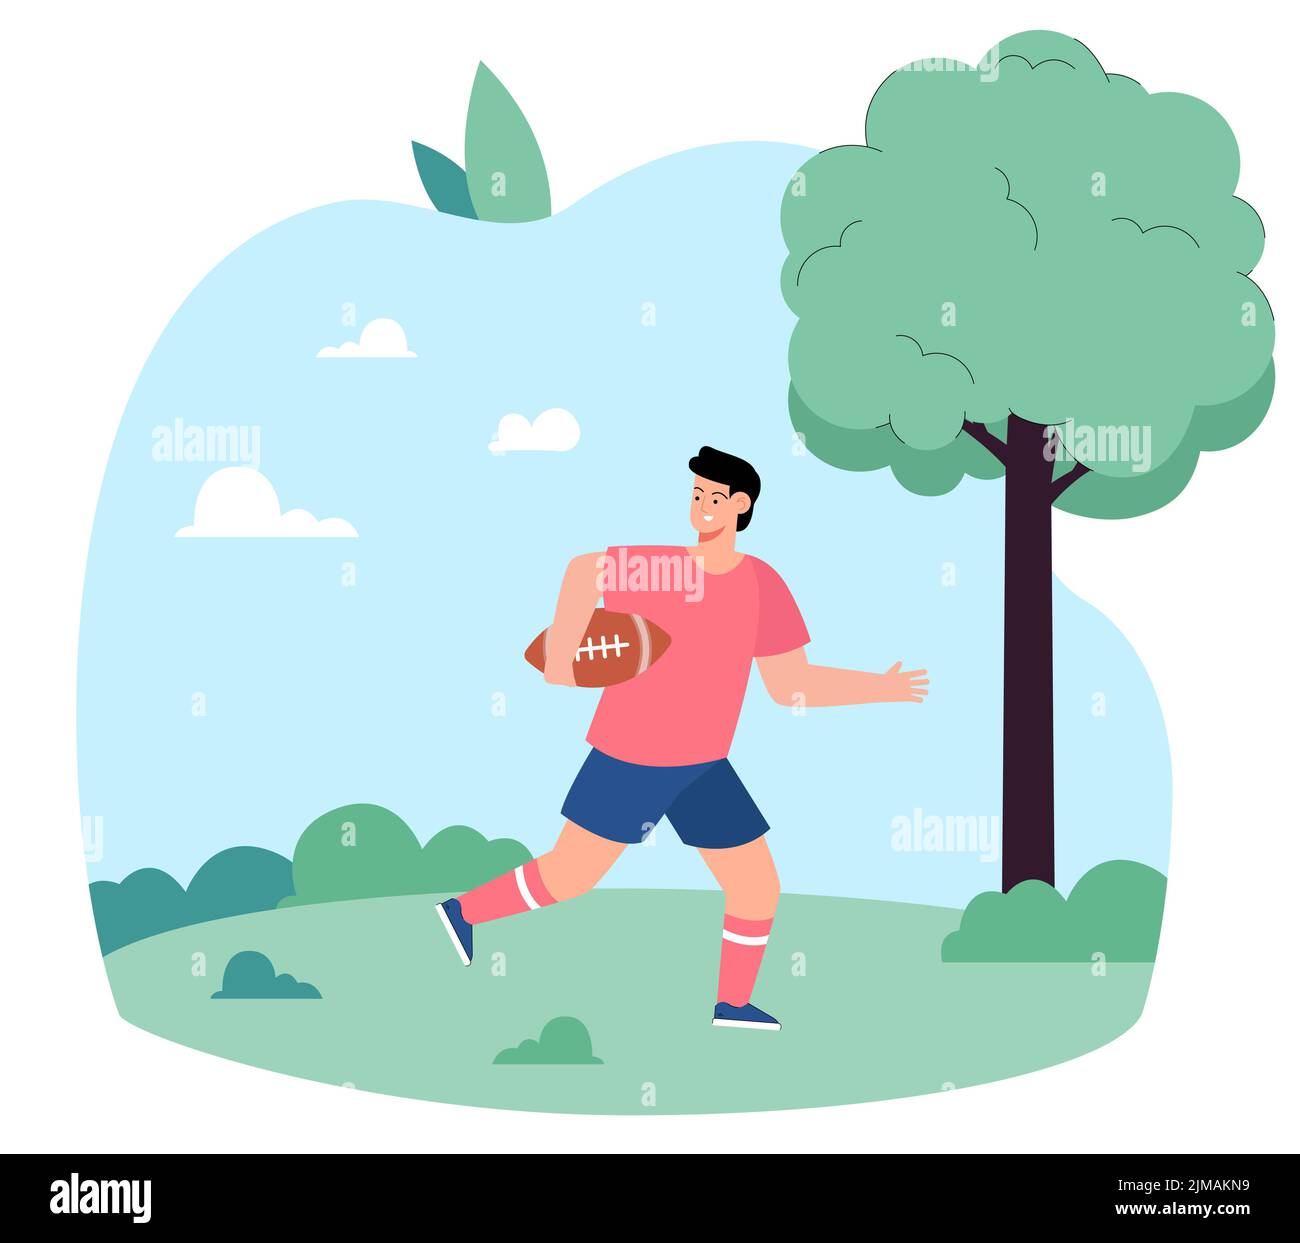 Young boy running through field with rugby ball. Kid cartoon character playing ball game flat vector illustration. Sports, outdoor activity concept fo Stock Vector